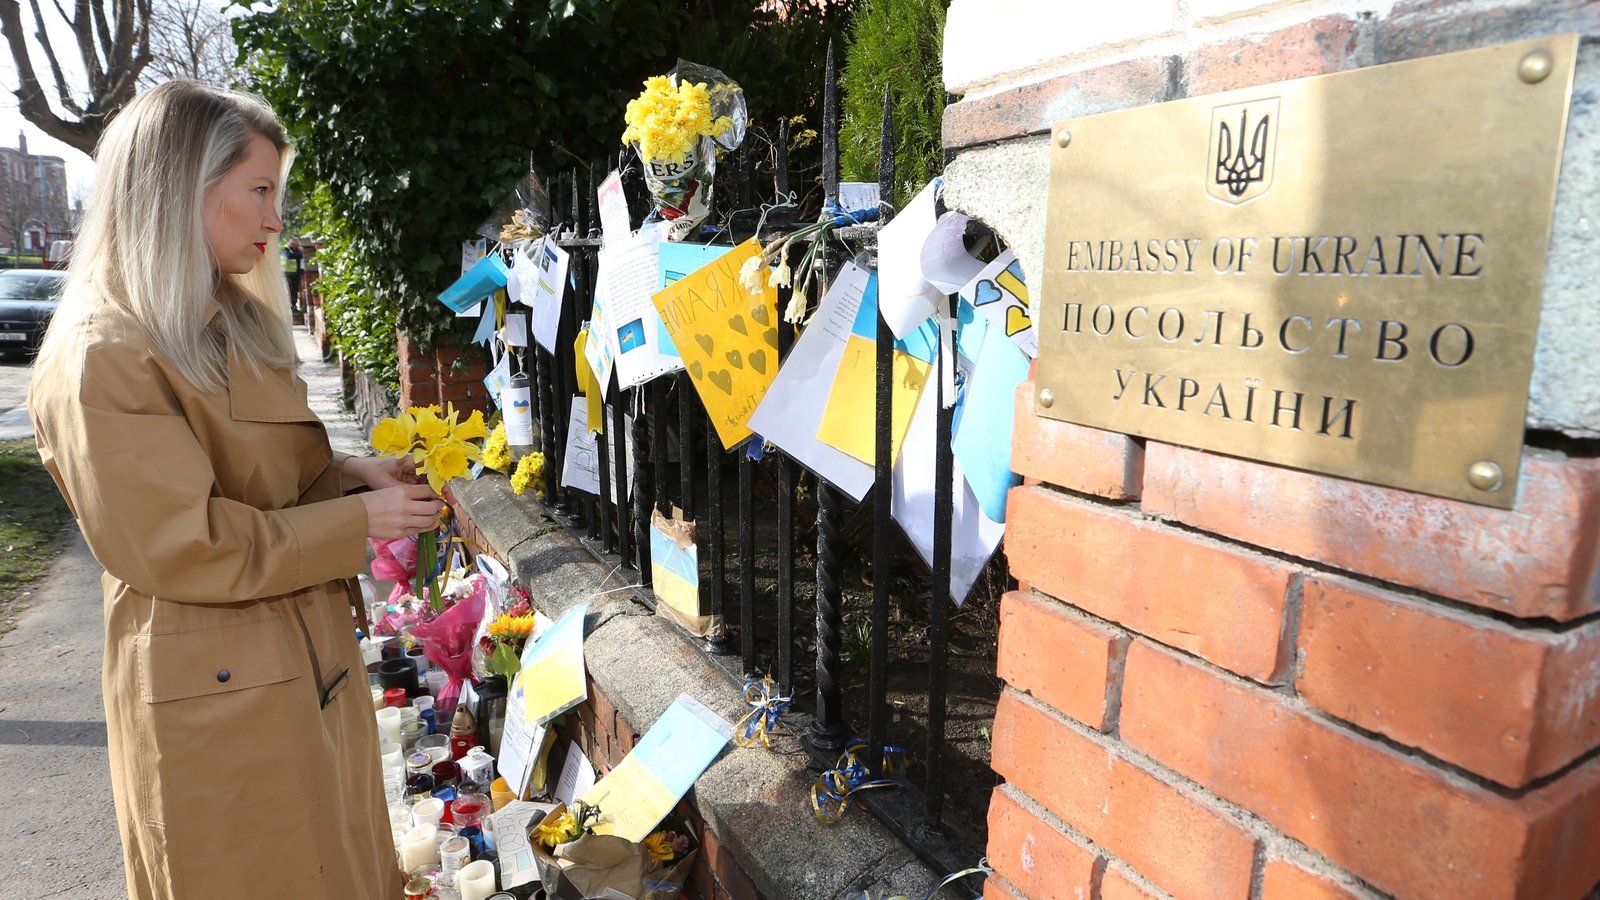 Image - A woman looks at flowers and messages of support for the people of Ukraine outside the Ukraine embassy in Dublin (Pic: RollingNews.ie)